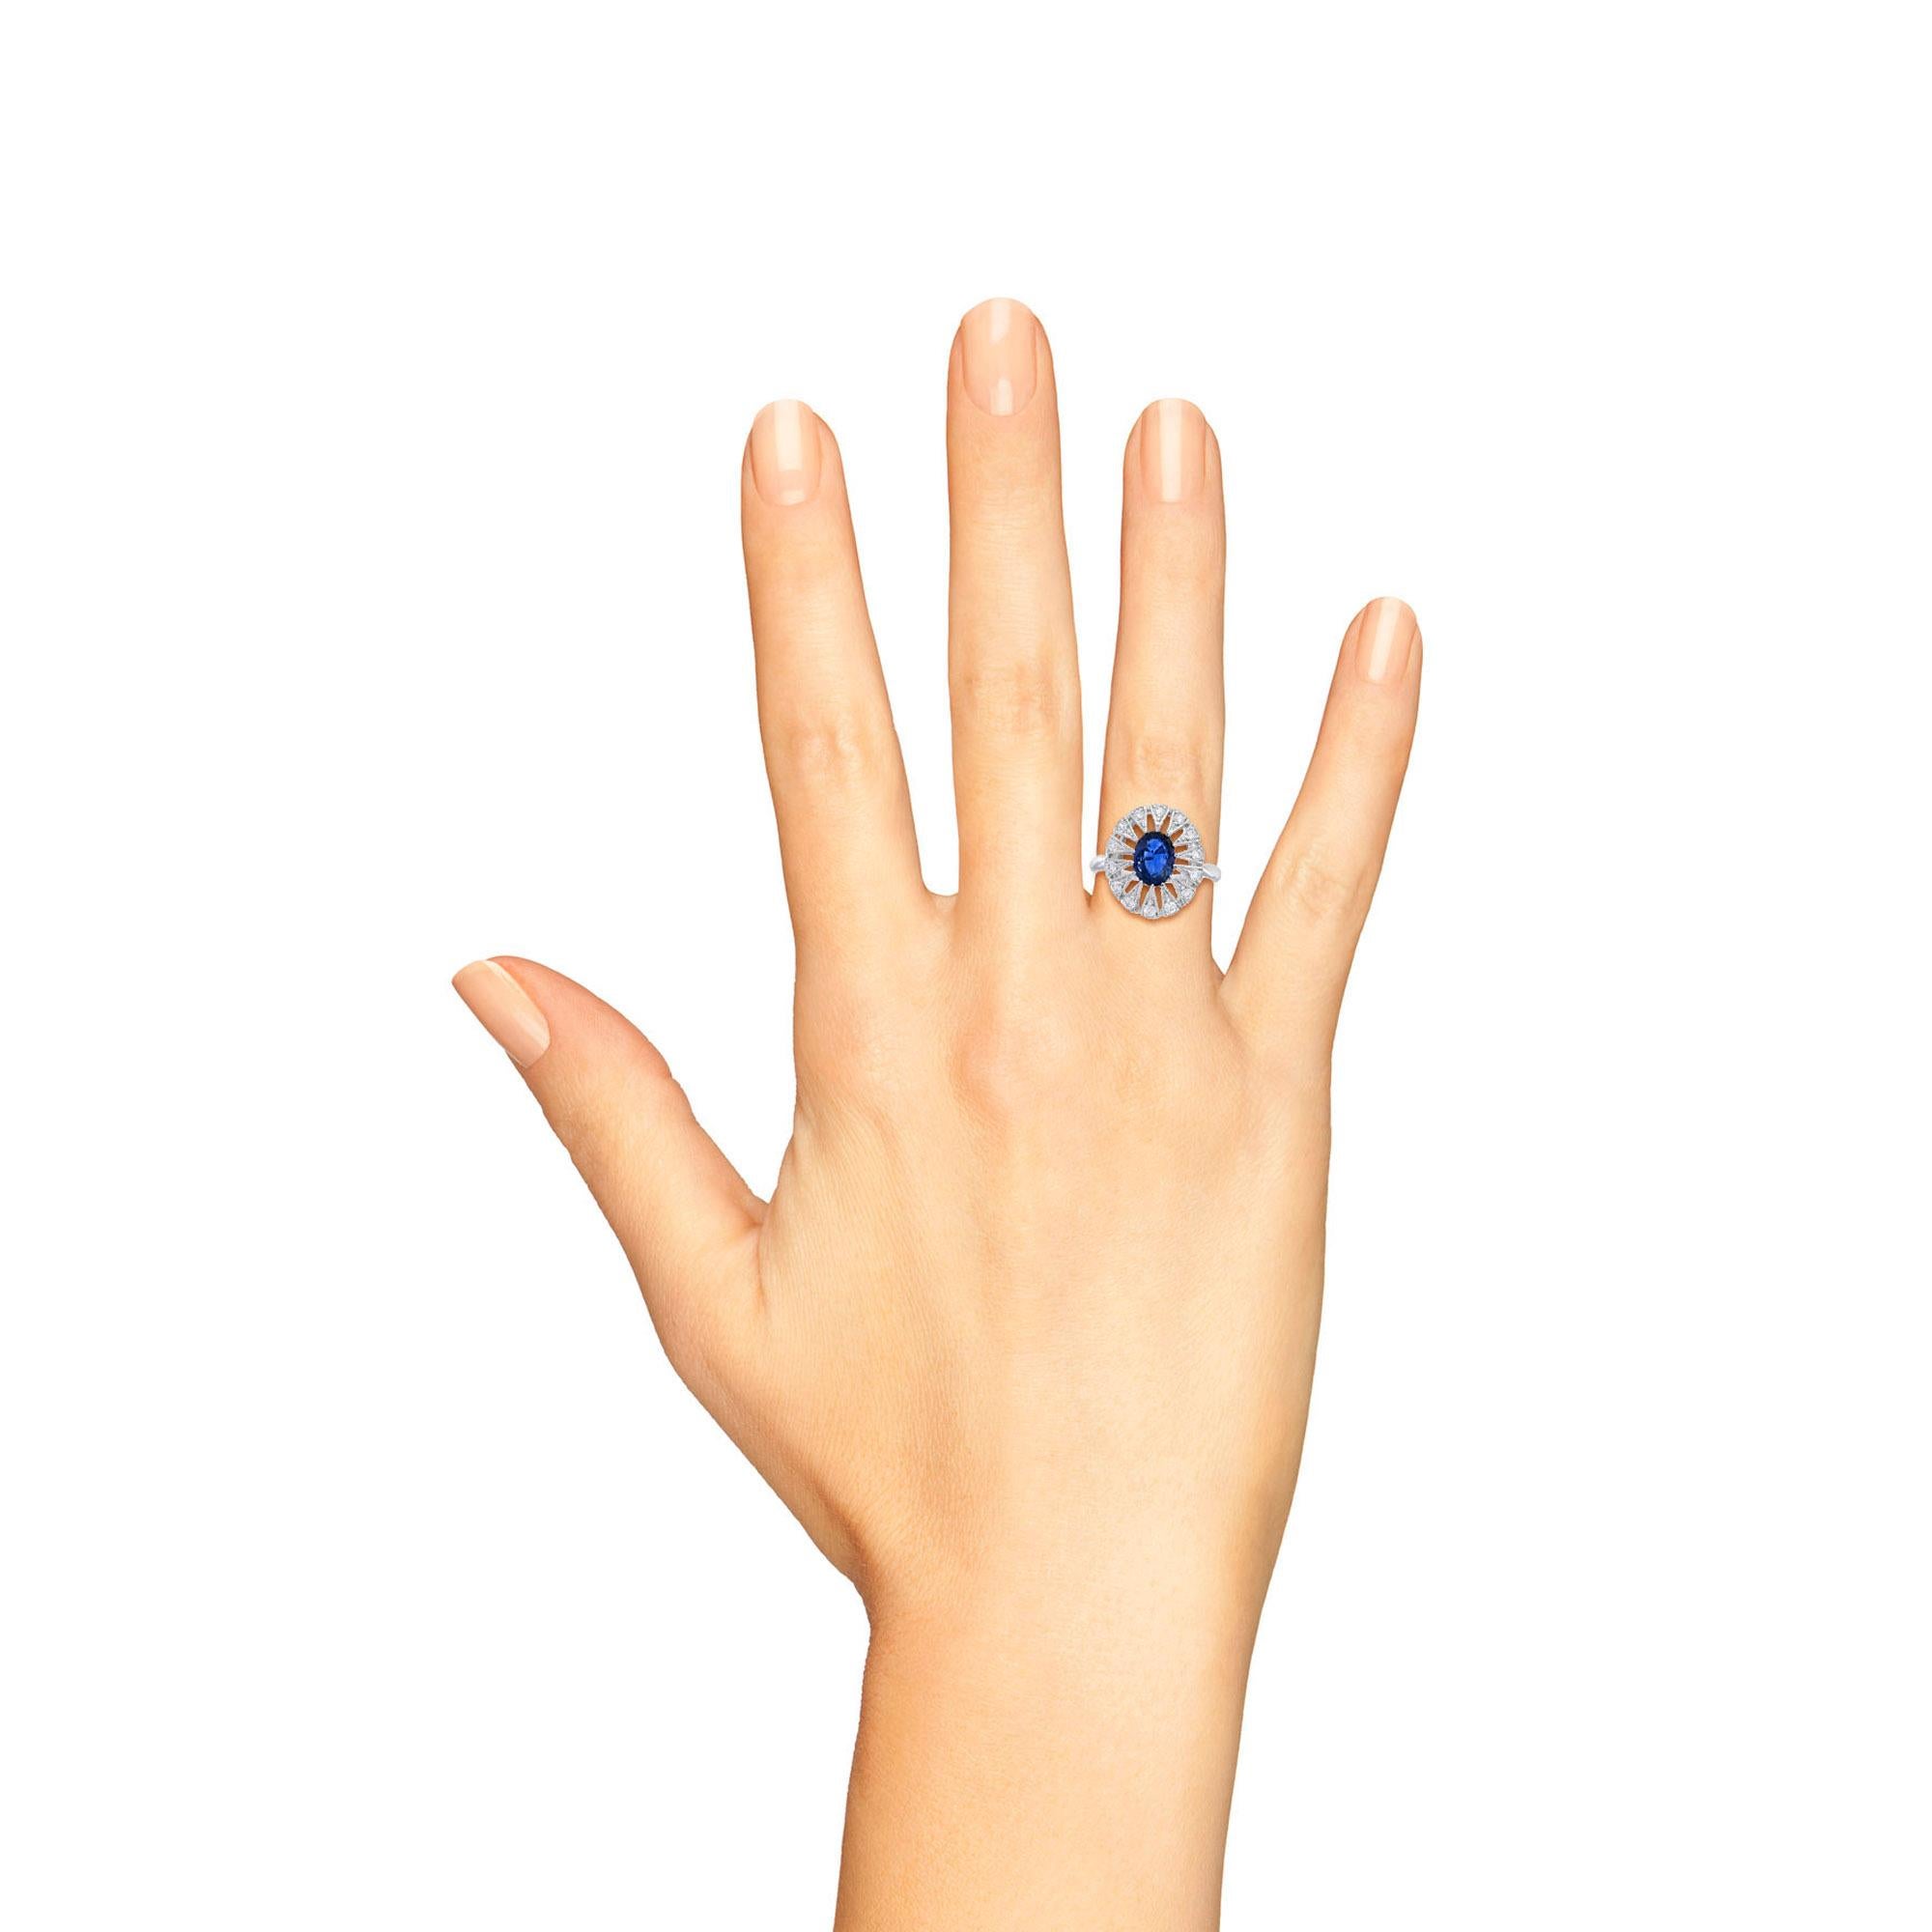 For Sale:  Oval Ceylon Sapphire with Diamond Open Work Halo Ring in 18K White Gold 7